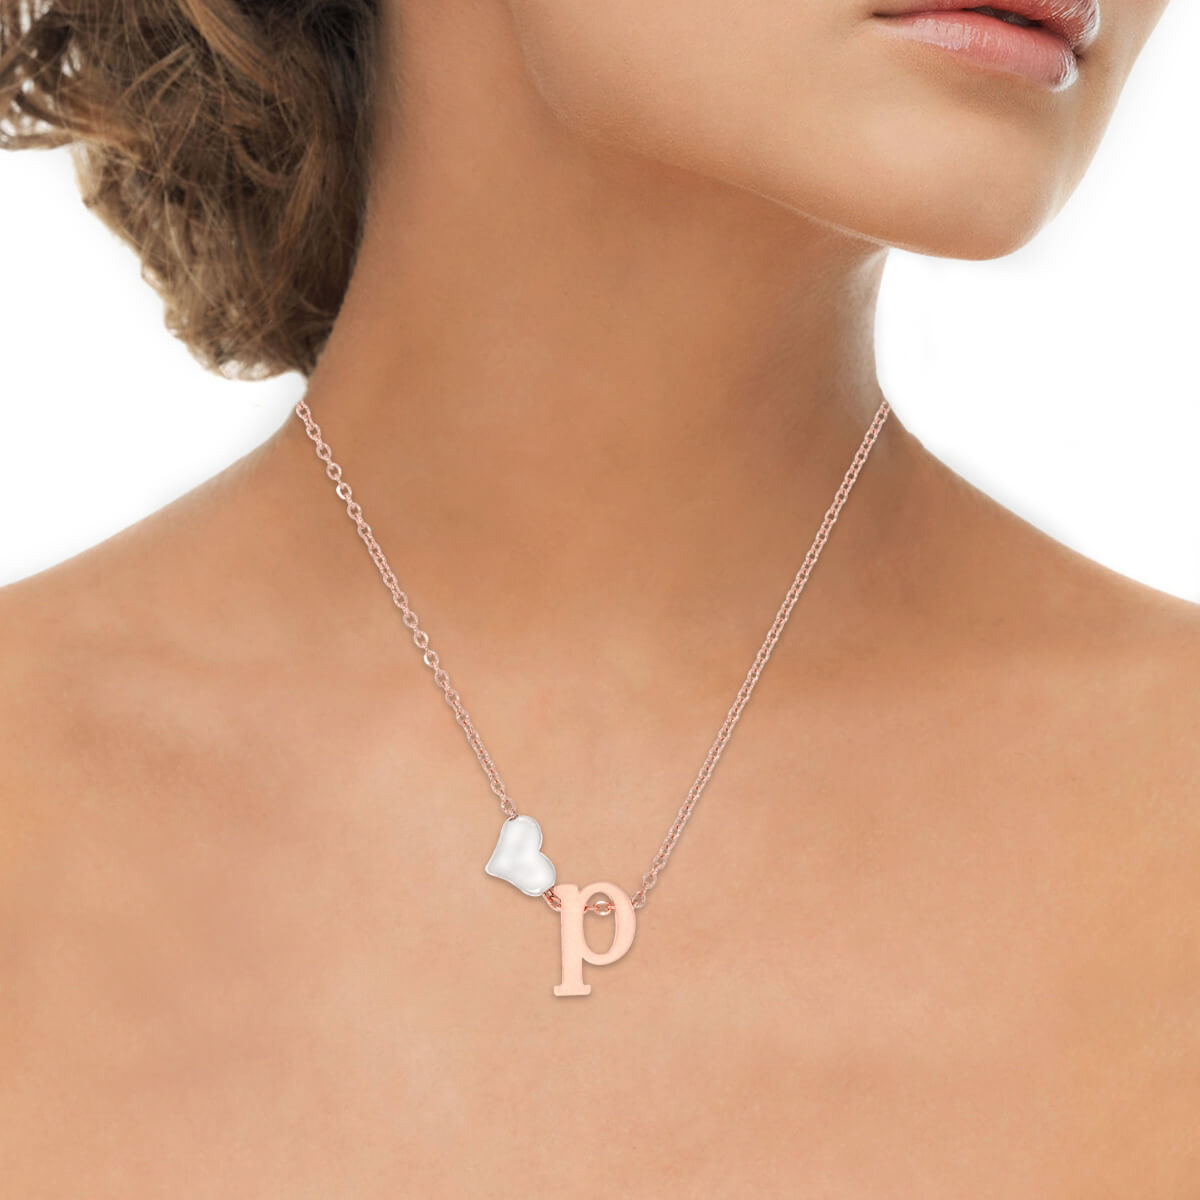 Sterling Silver "P" Initial Necklace